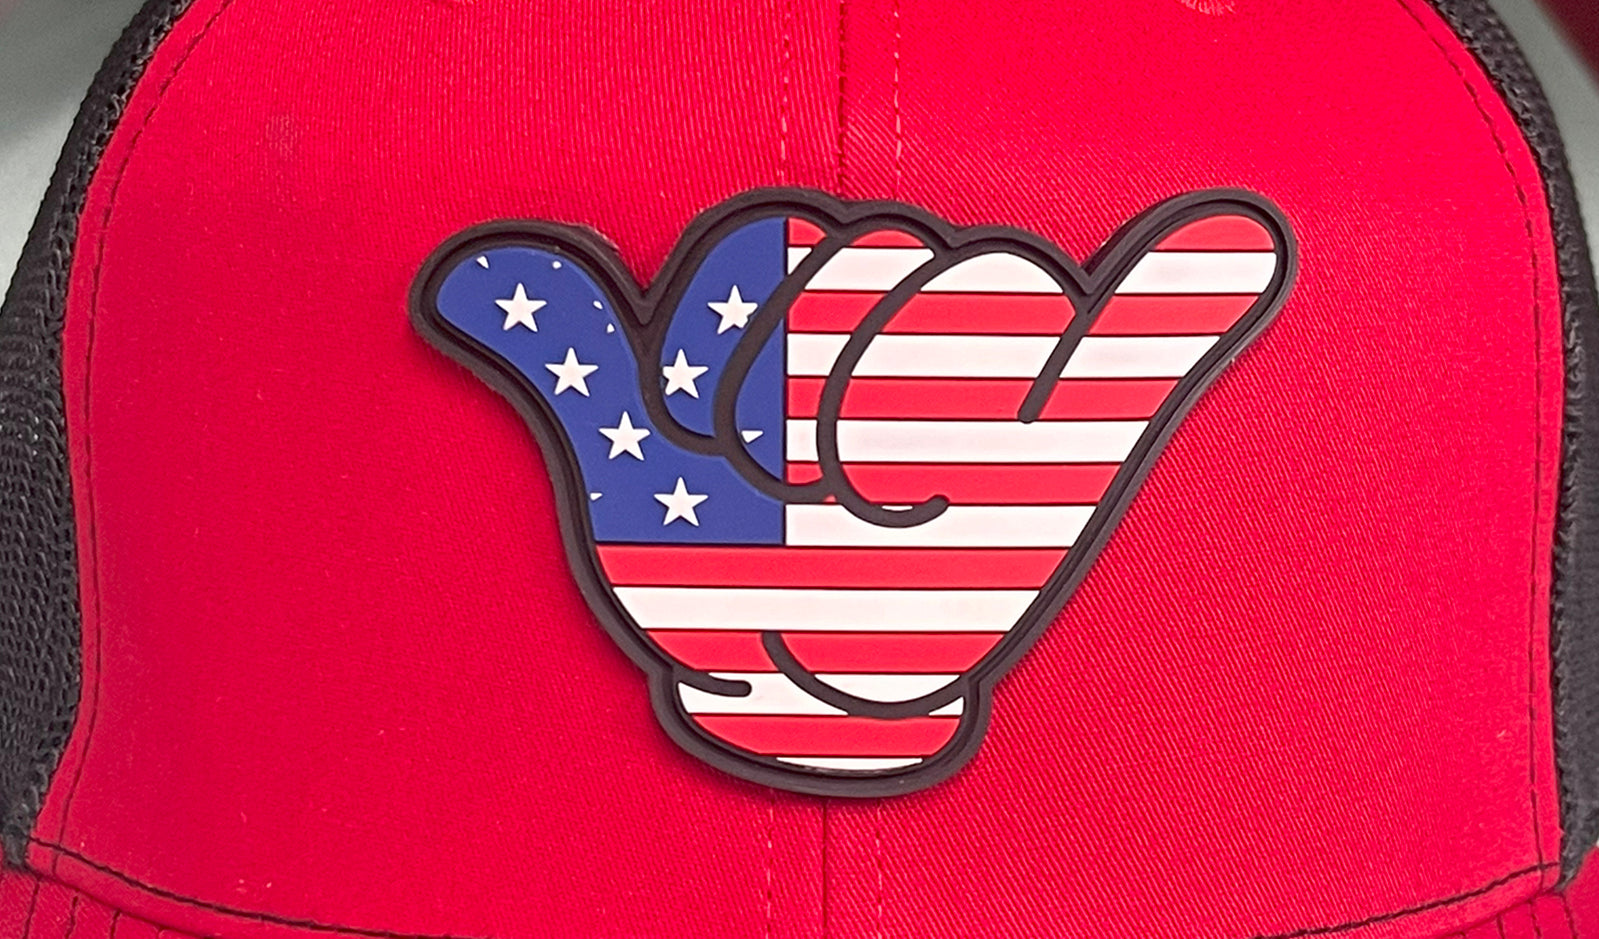 USA Flag PVC Patch Hang Loose - R112 Snapback Red/Black – Myrtle Beach Hats™